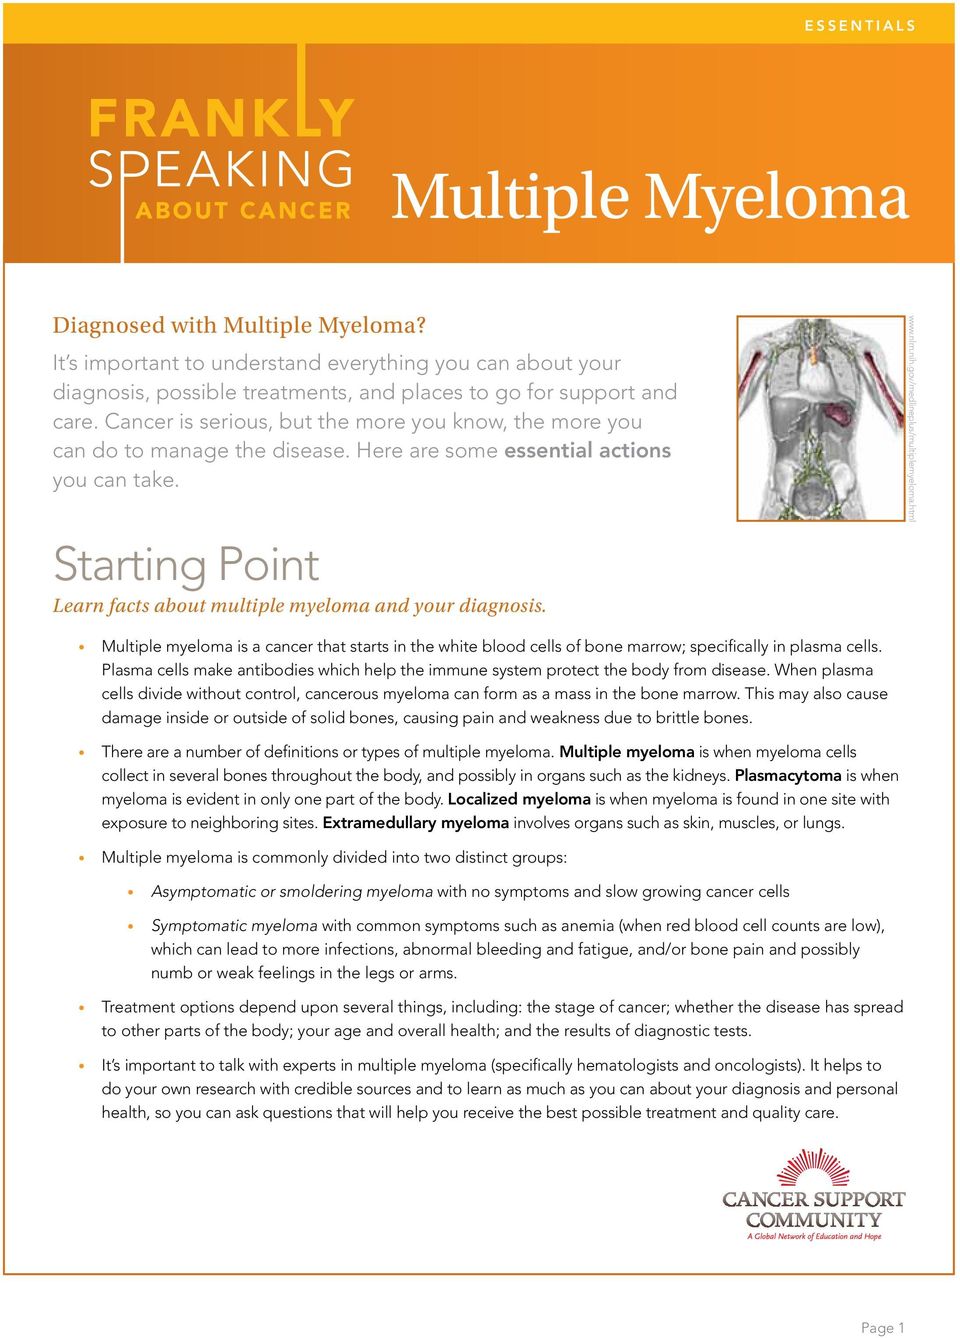 www.nlm.nih.gov/medlineplus/multiplemyeloma.html Multiple myeloma is a cancer that starts in the white blood cells of bone marrow; specifically in plasma cells.